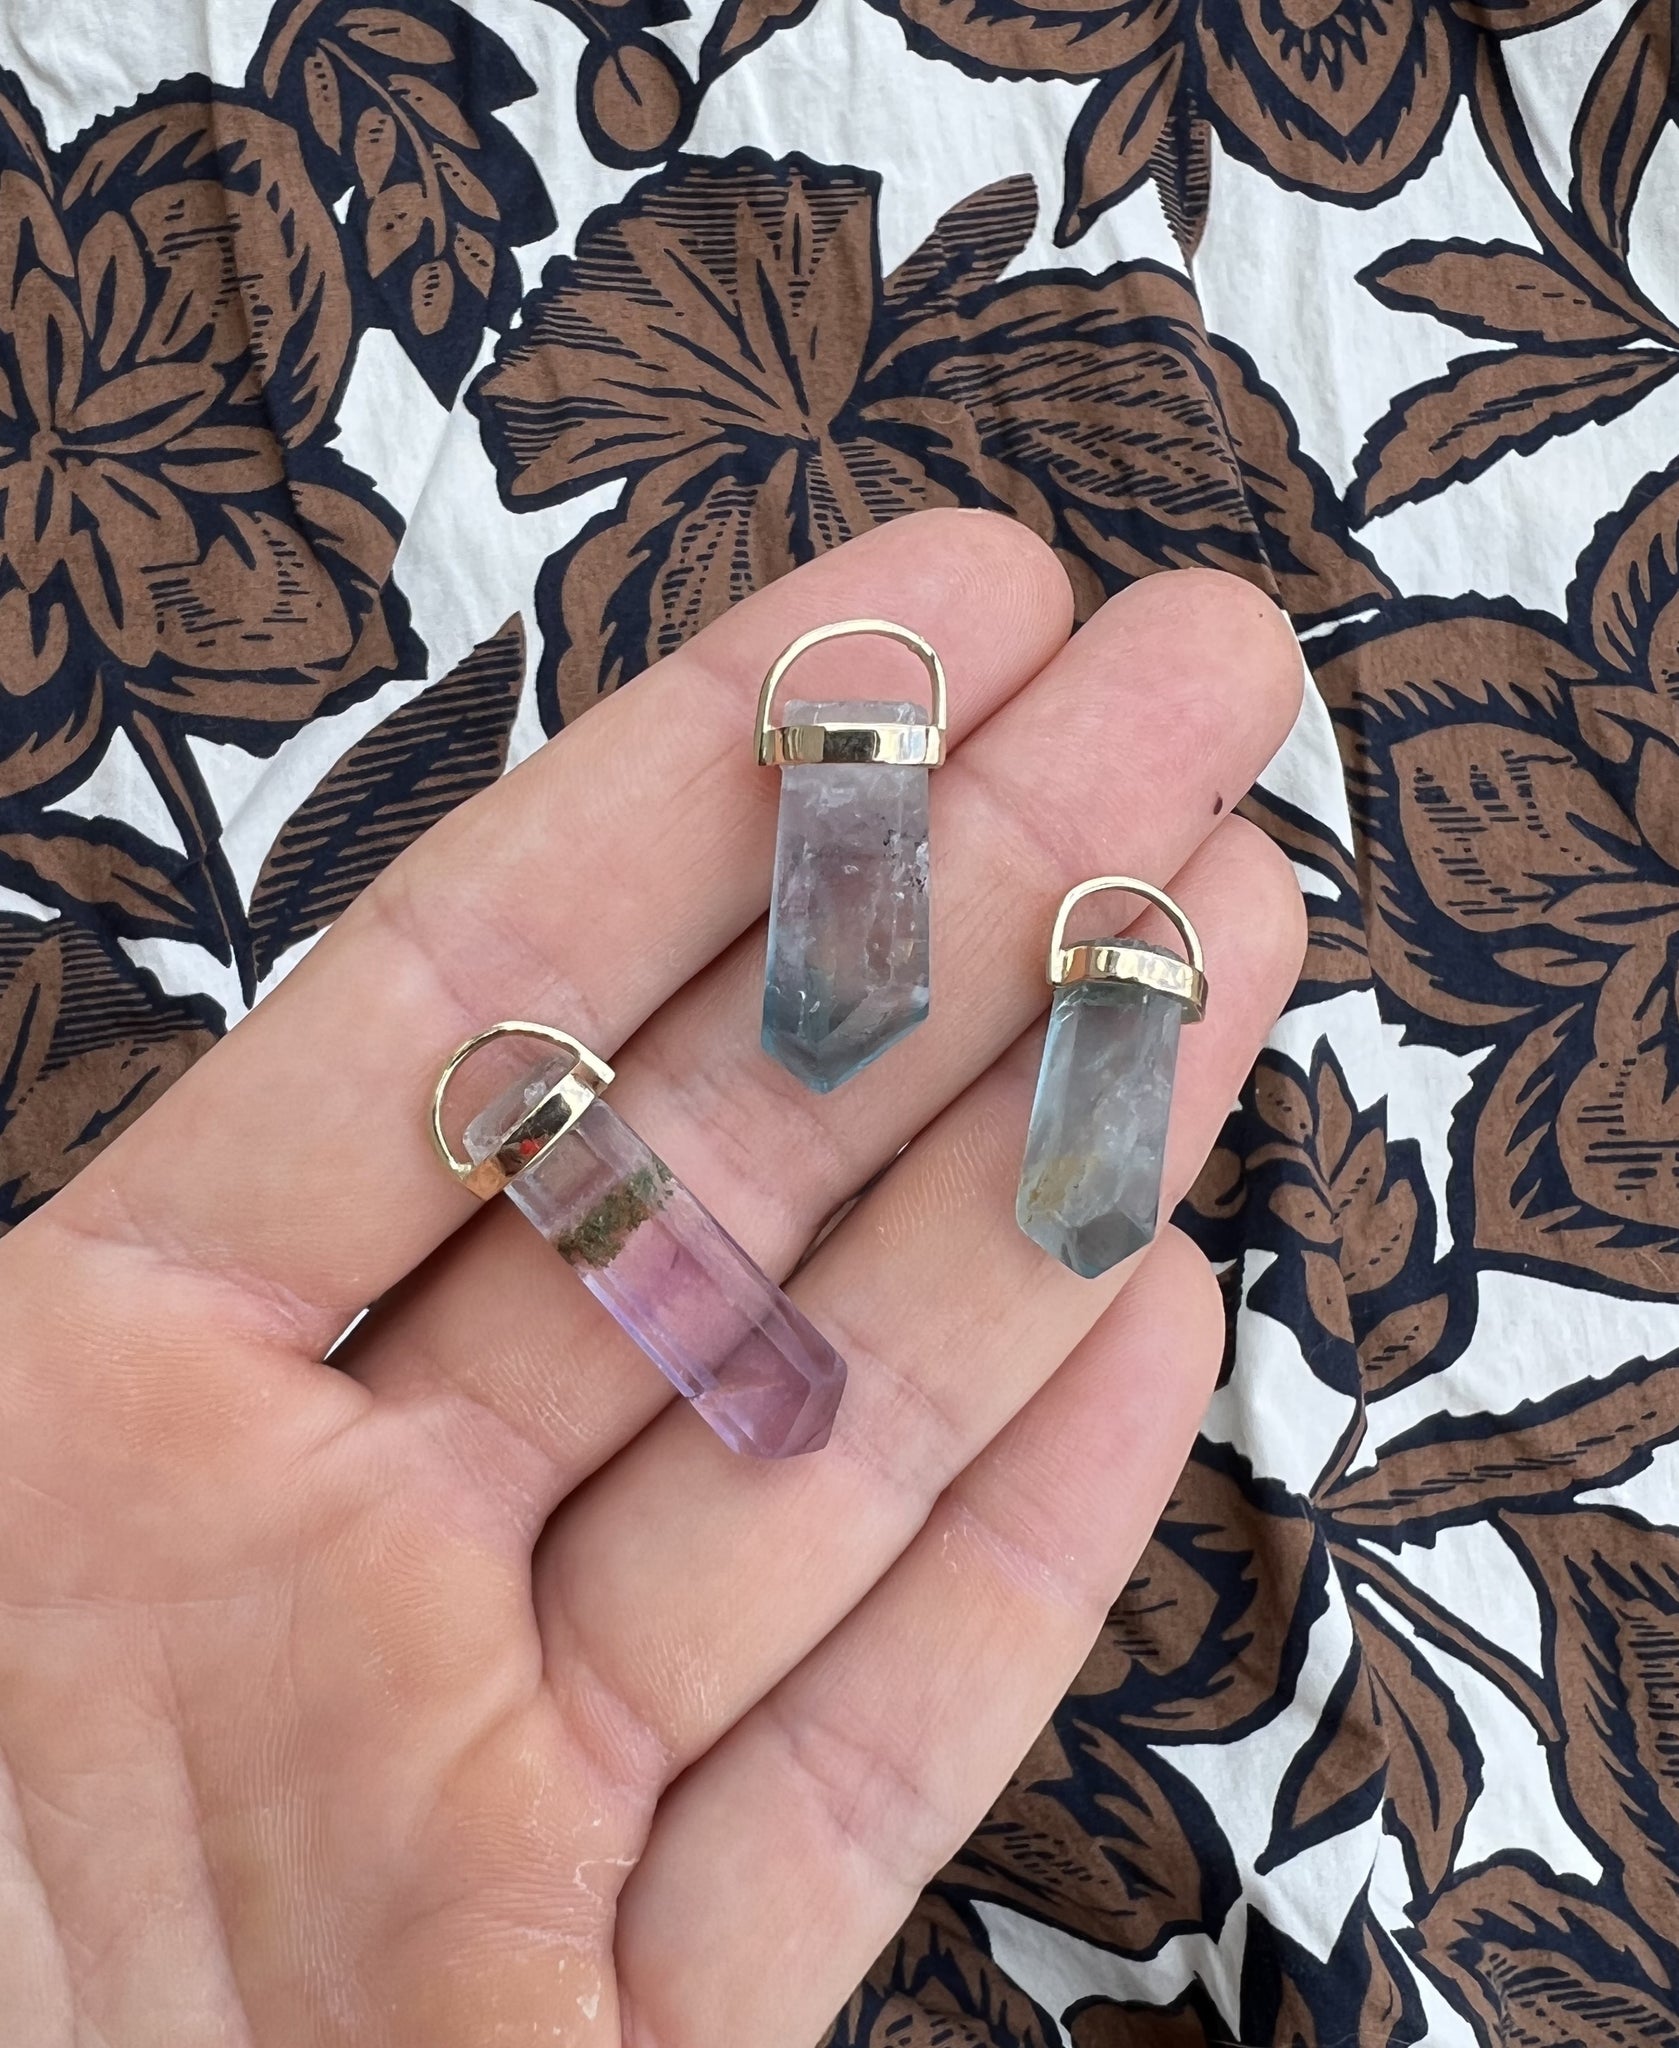 Lico Jewelry's Fluorite Crystal Pendants, handcrafted in Montreal with genuine fluorite crystals in shades of green, lilac and a hint of brown, each pendant is unique.